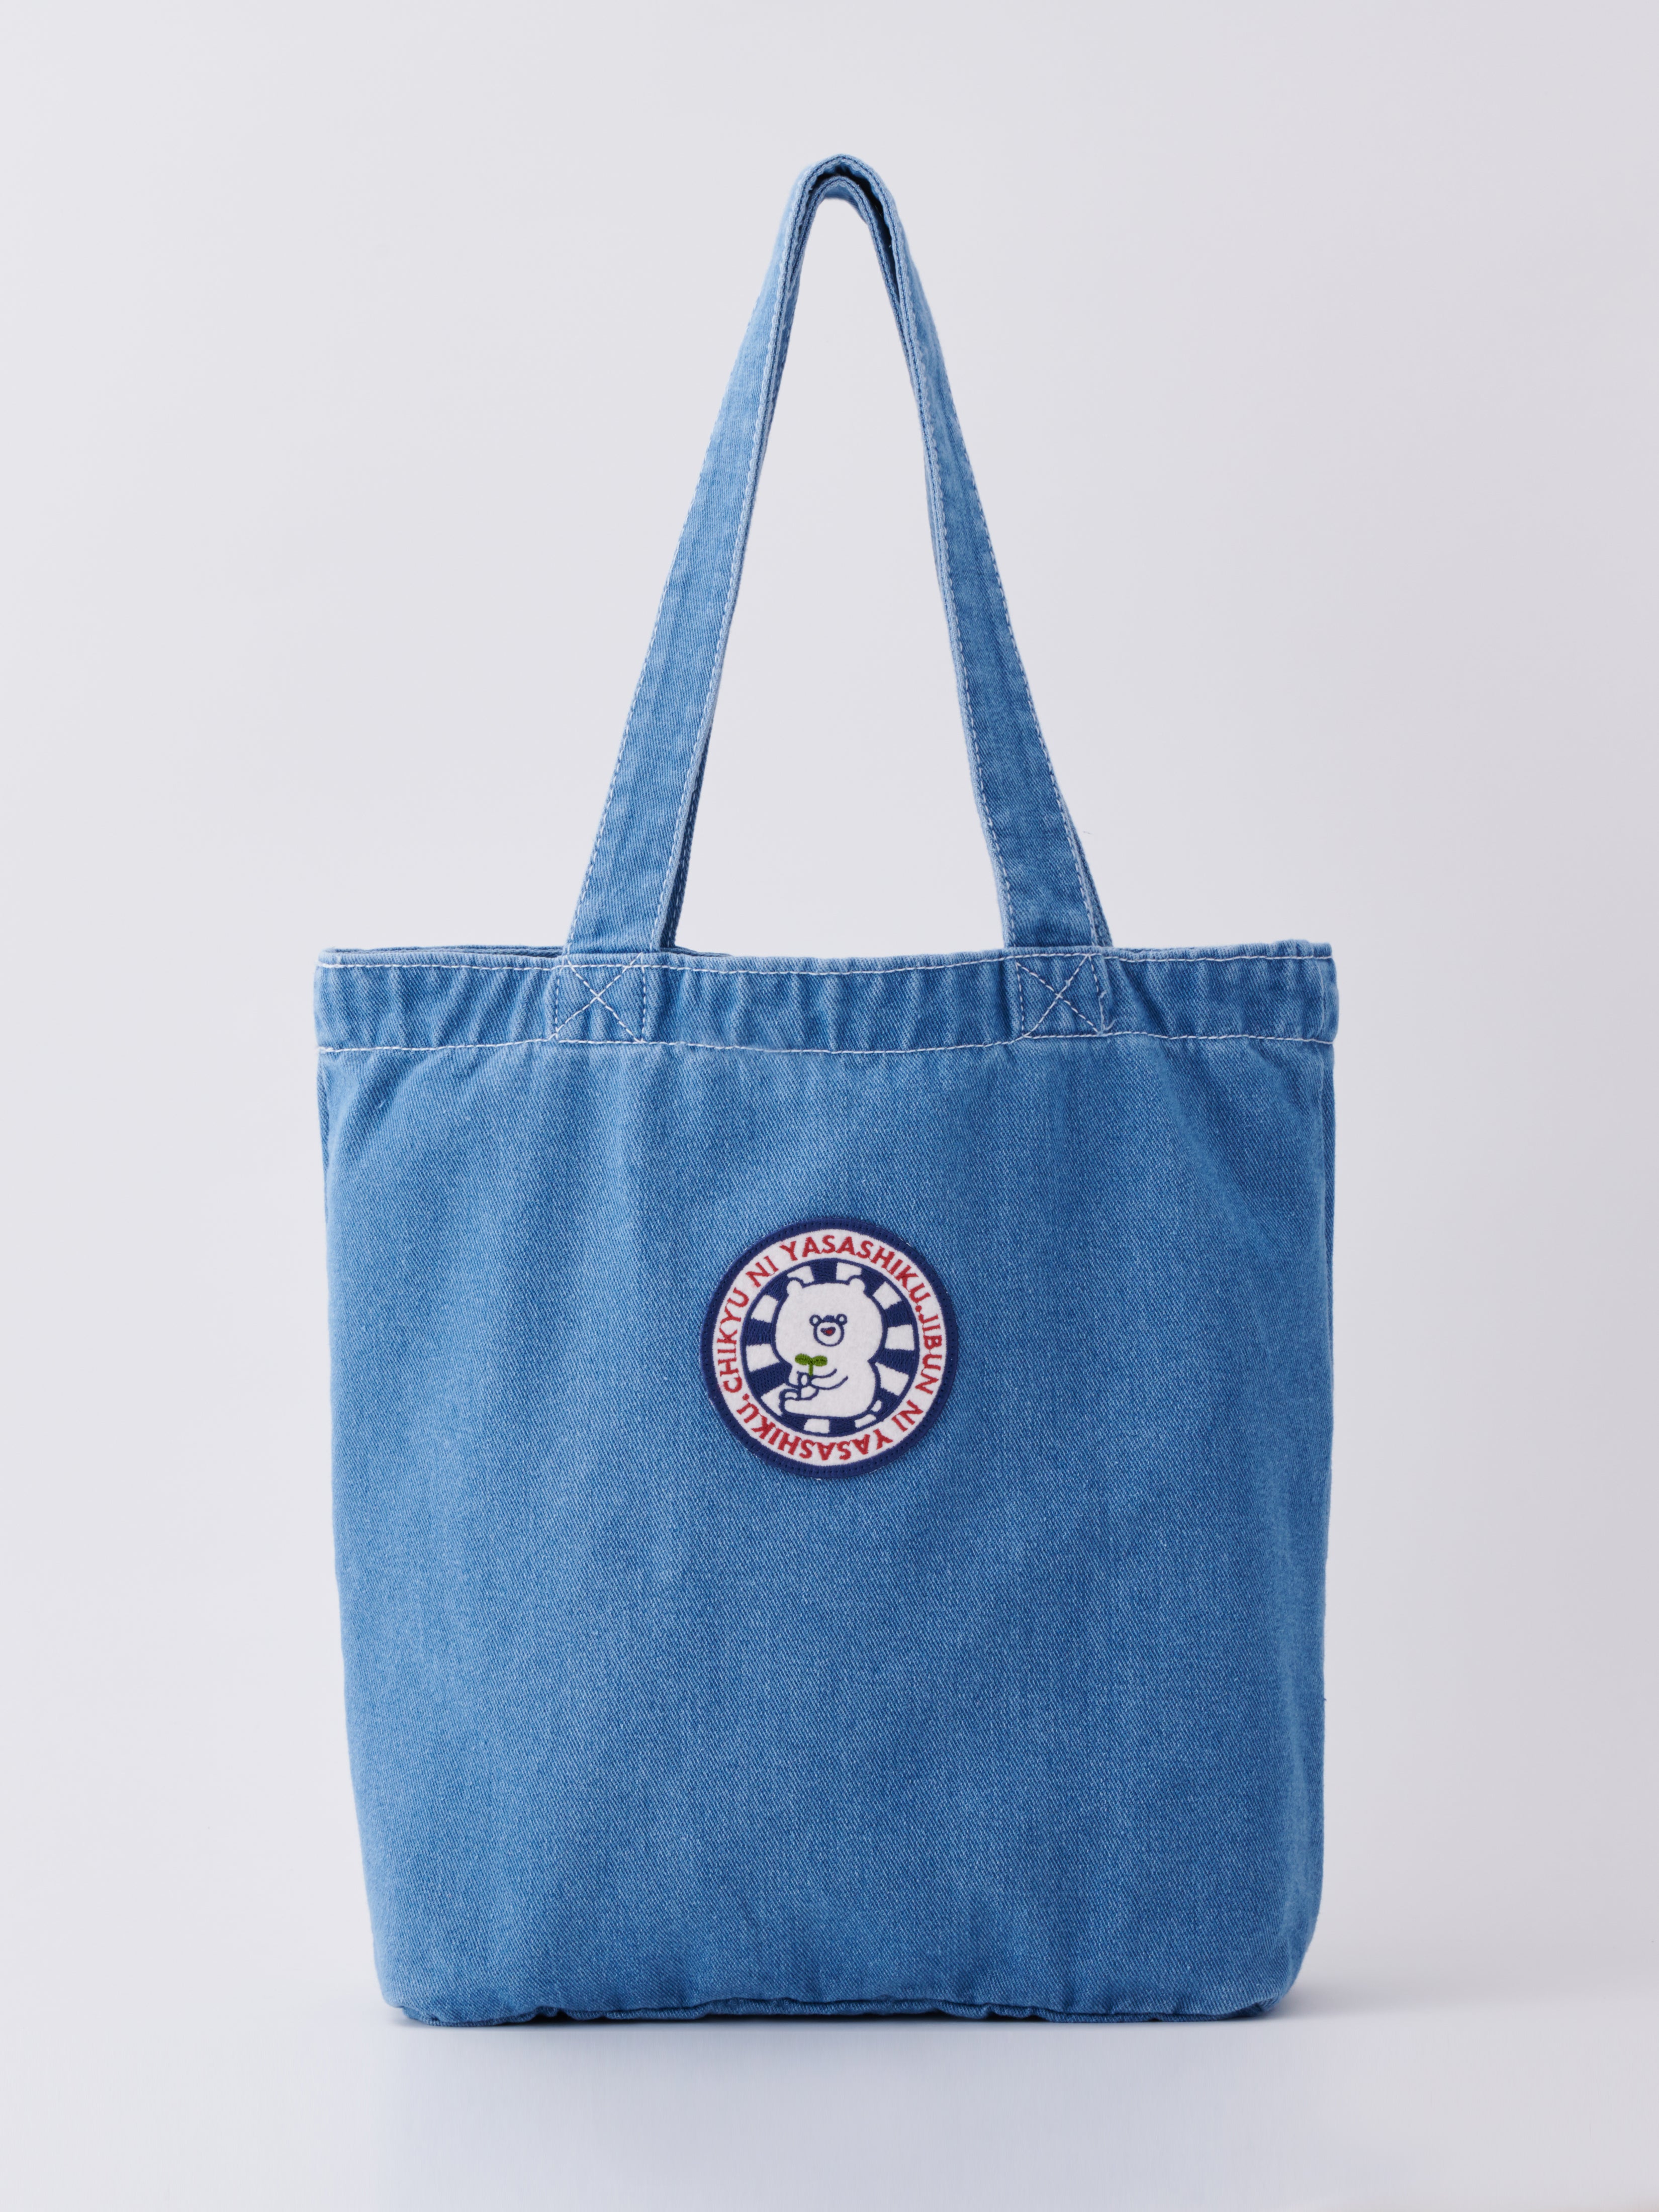 [EC Limited Color] Tote (Light Blue Denim) that can be gentle